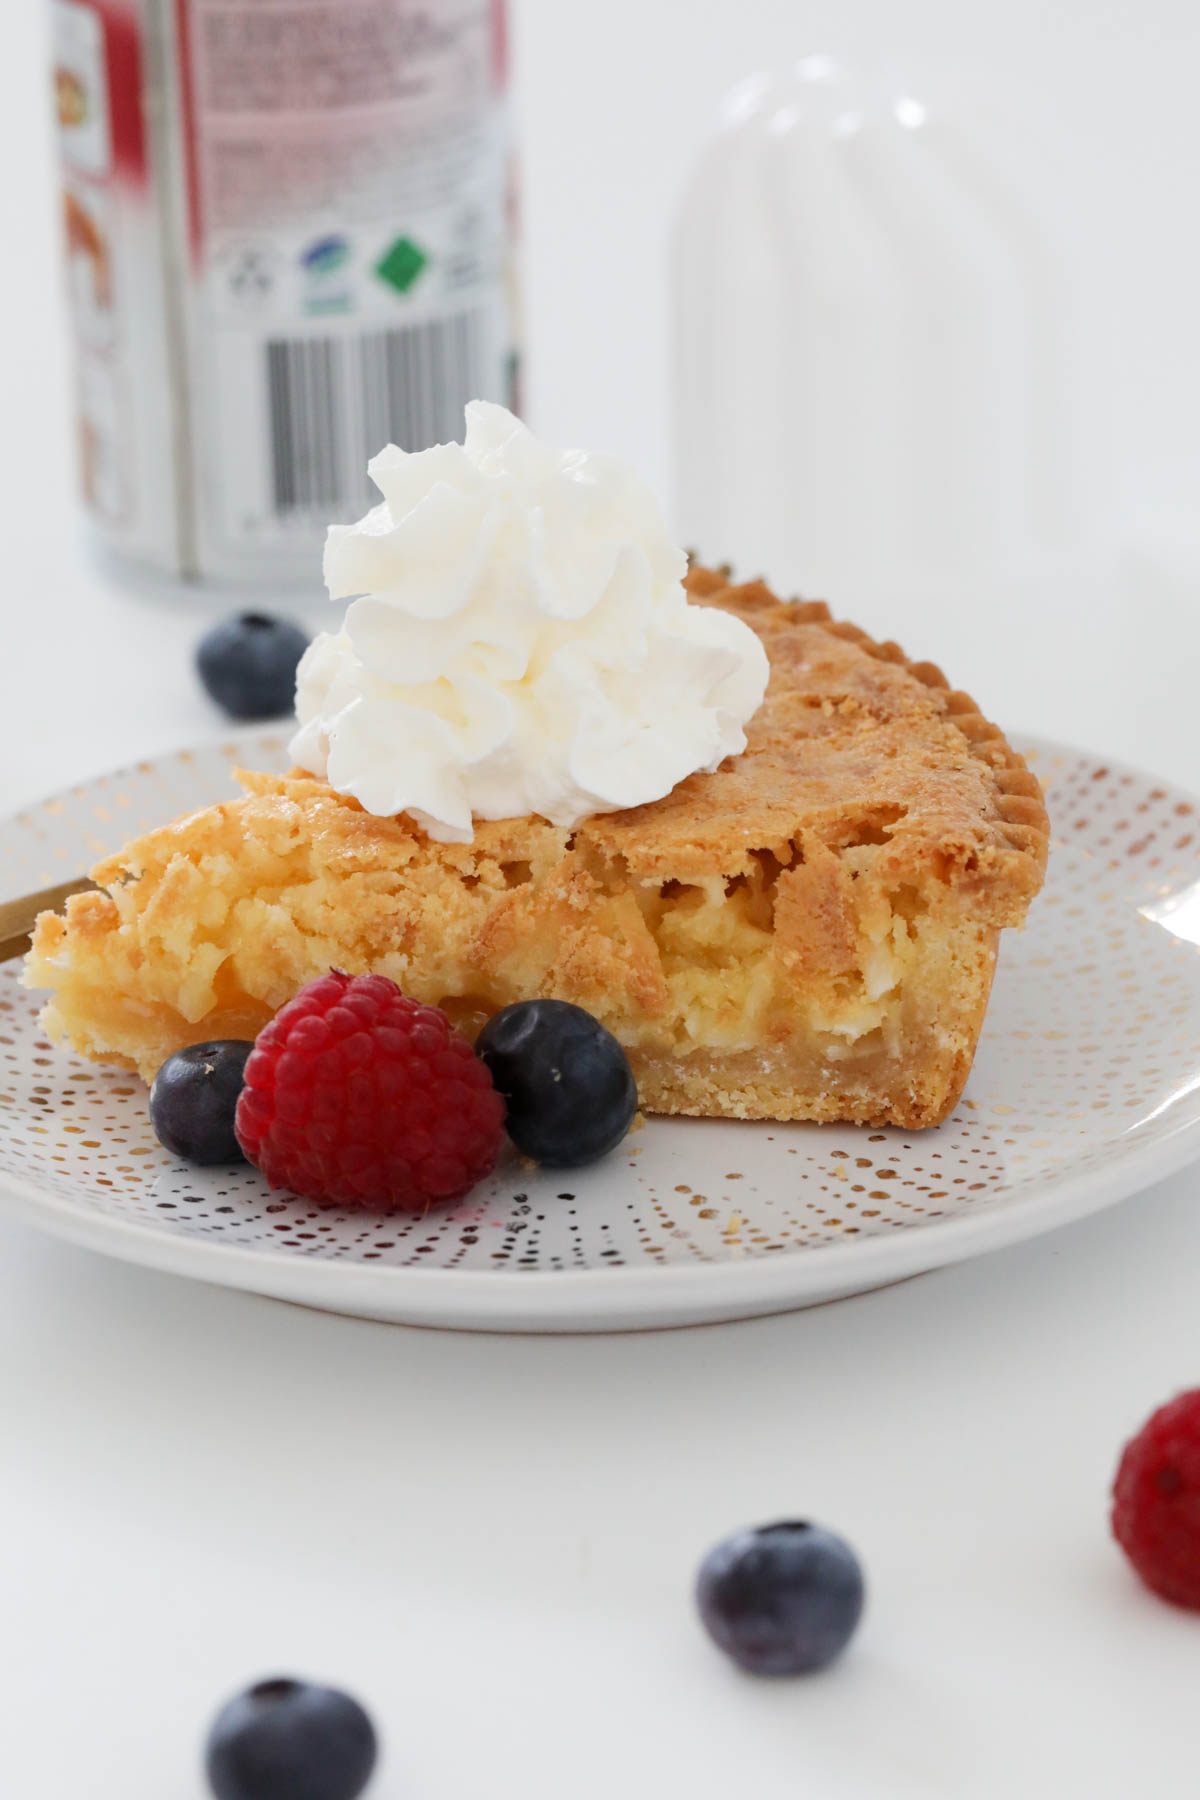 A serve of coconut pie with cream and berries